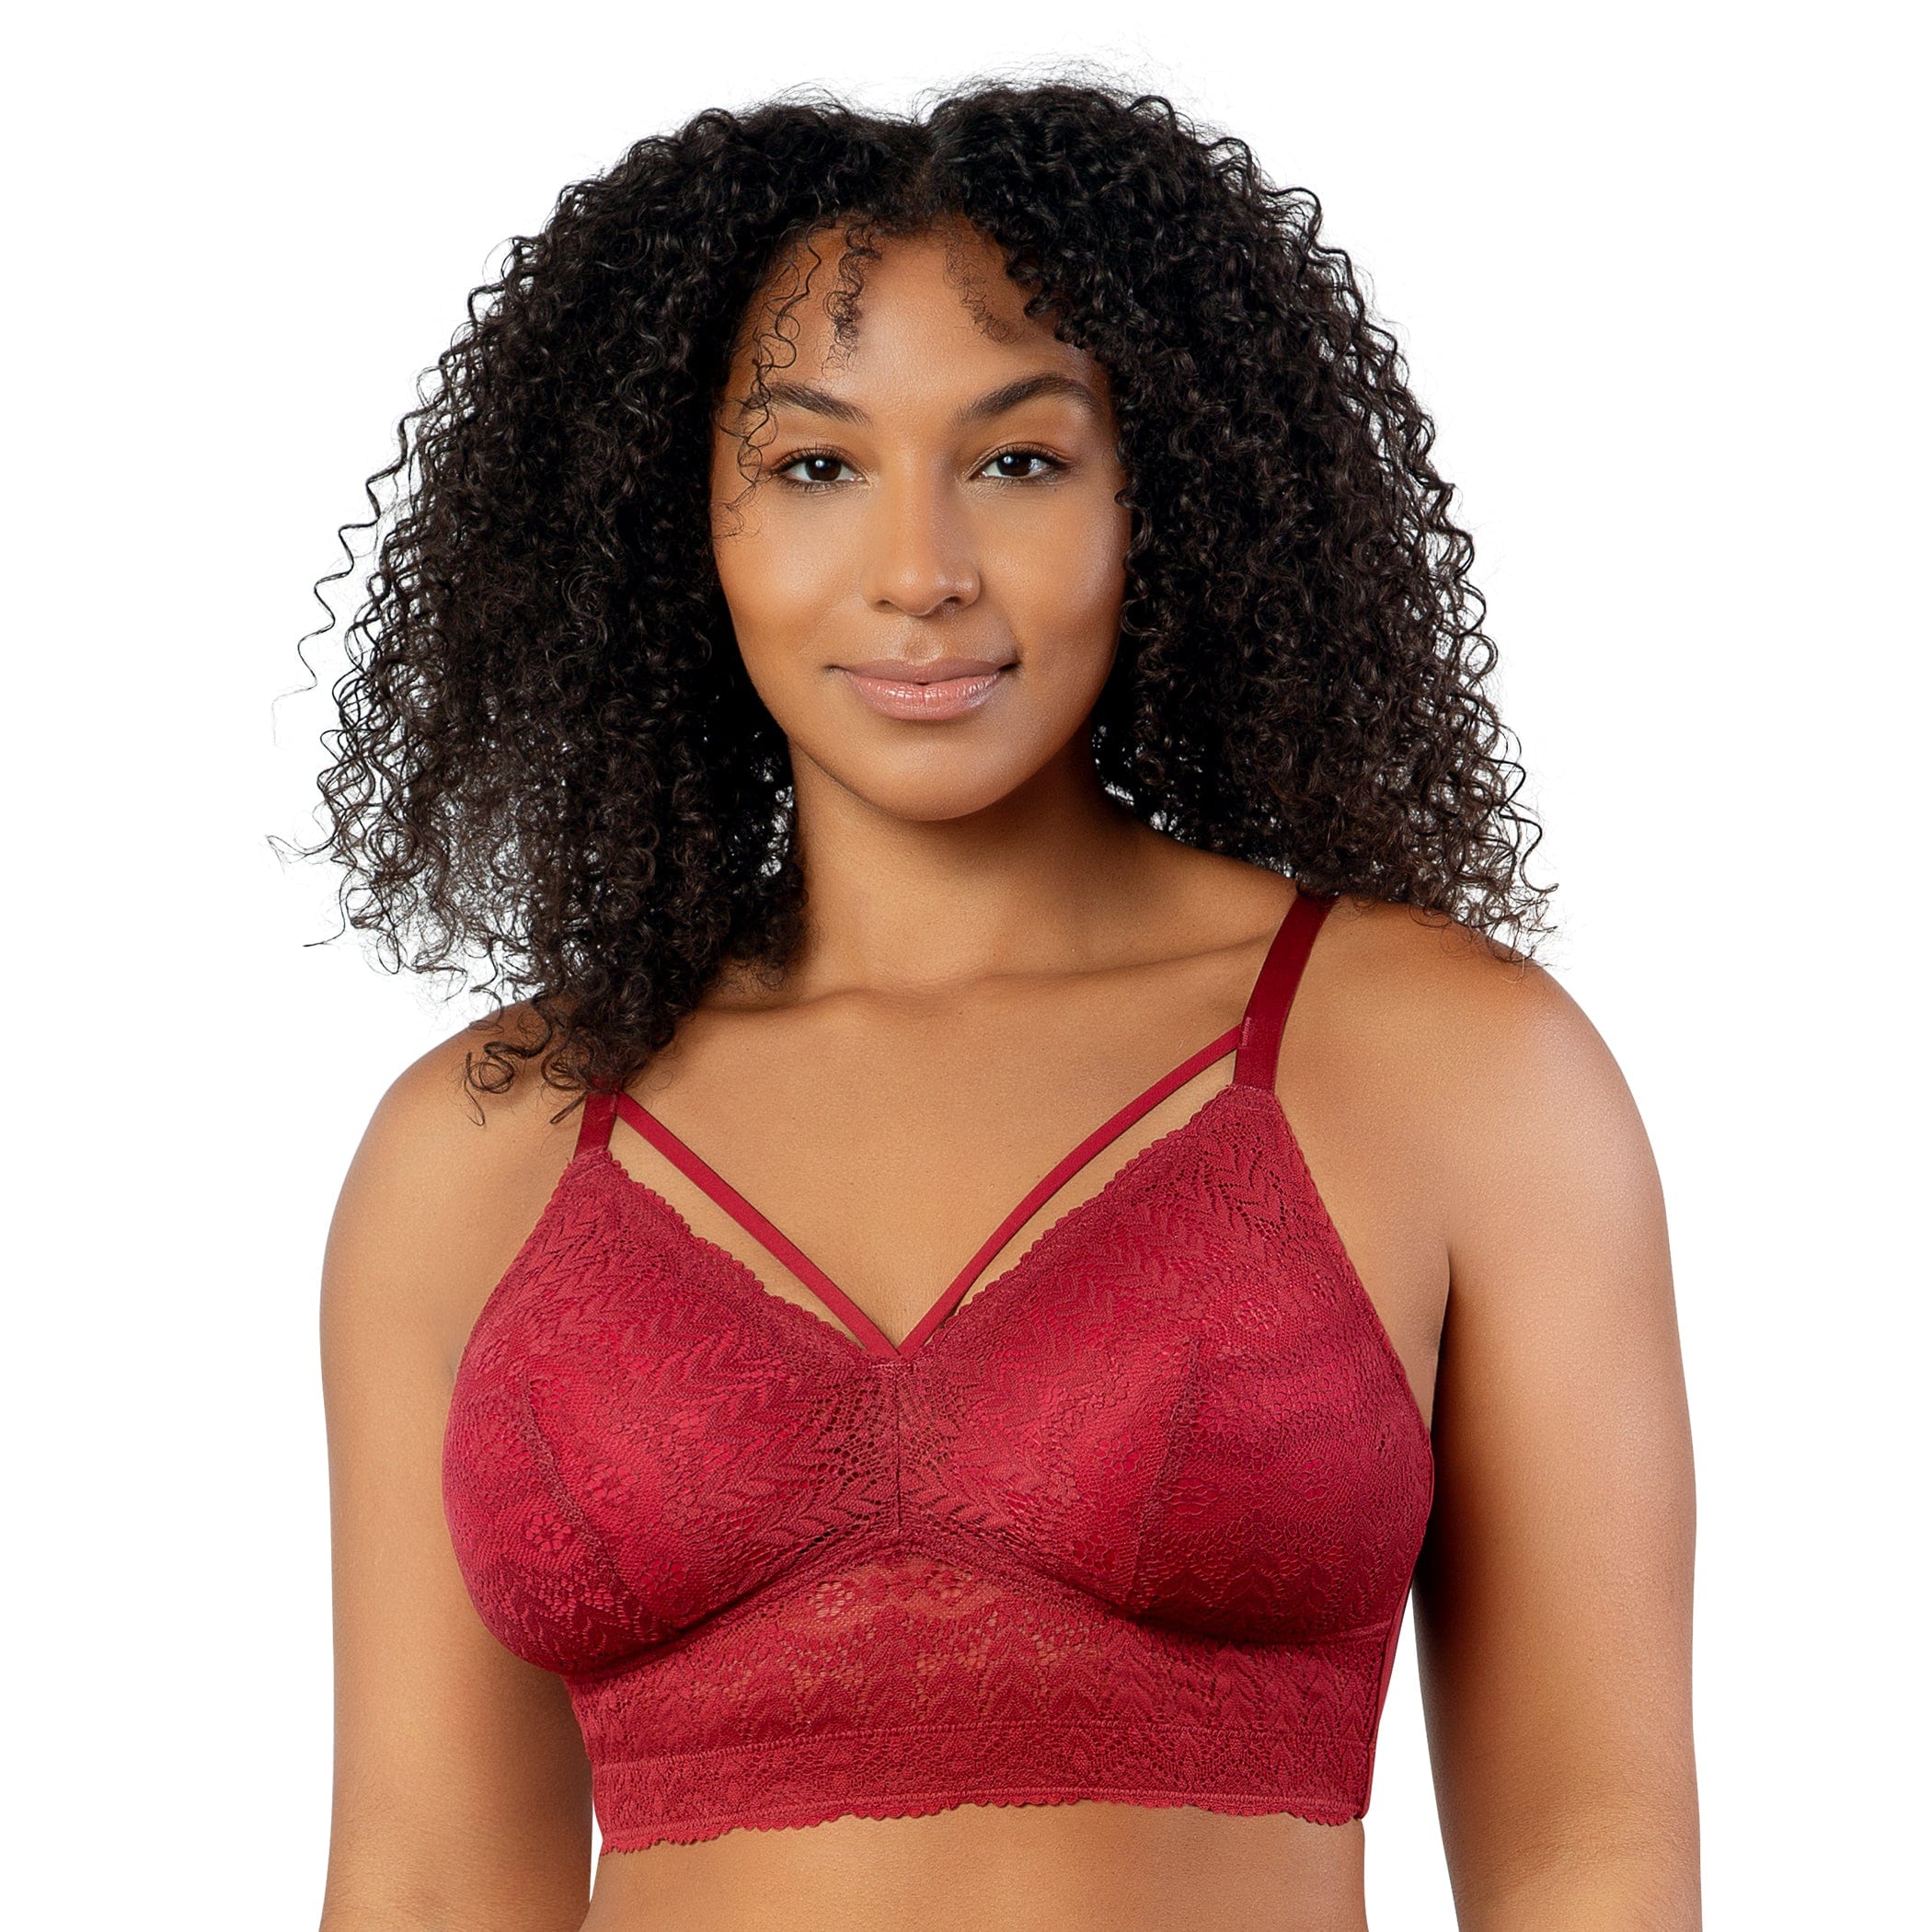 Bralette vs Bra: What's The Difference Between A Bra and A Bralette? -  ParfaitLingerie.com - Blog